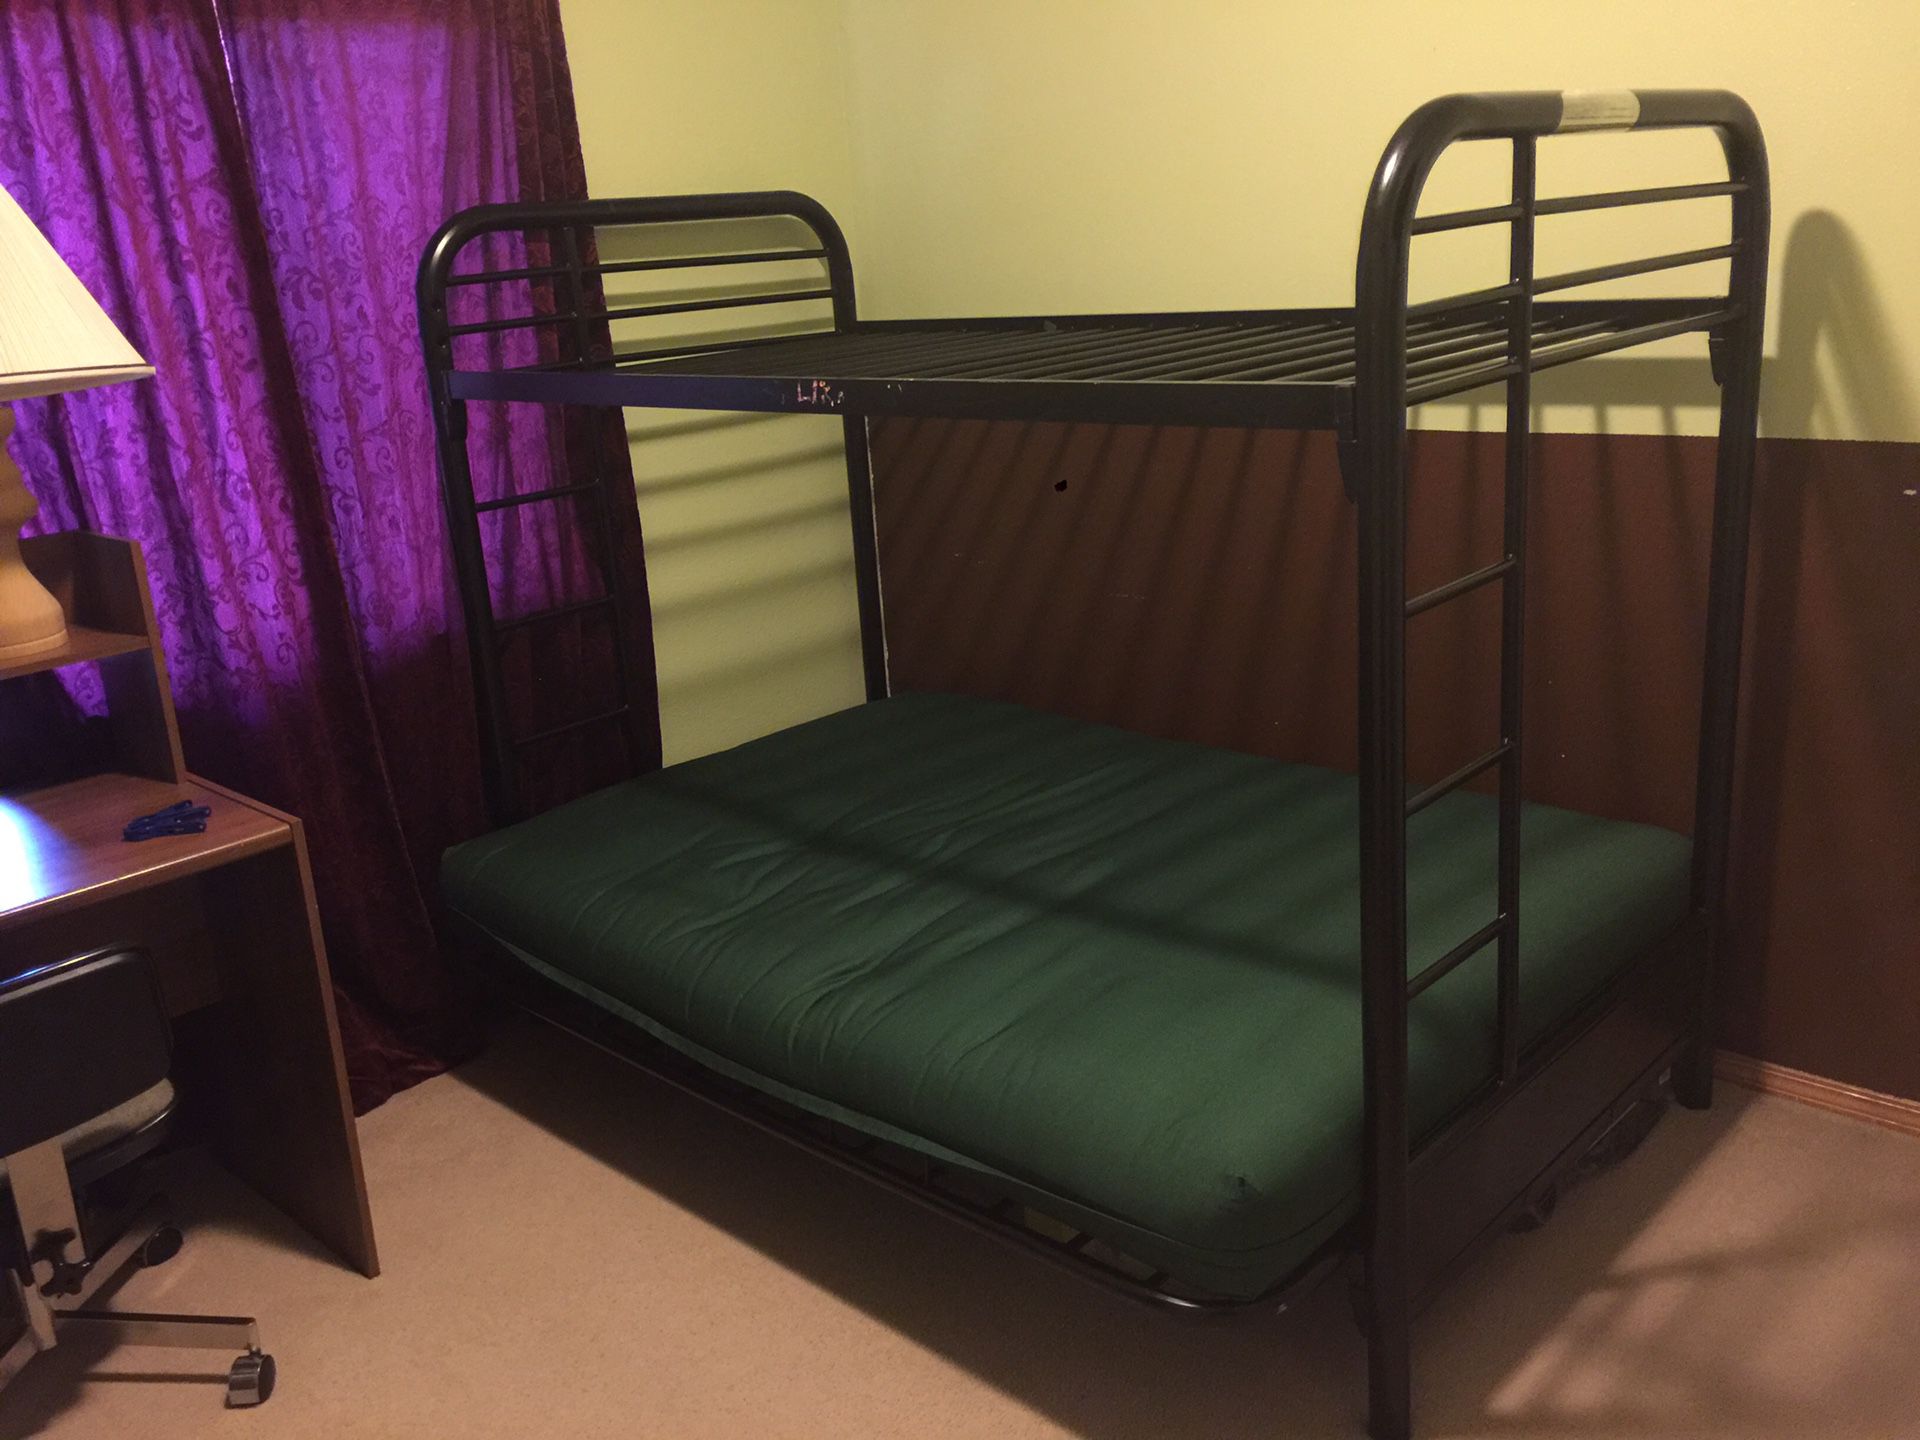 Easy install heavy duty black bunk bed w/ mattress - make the room more efficient